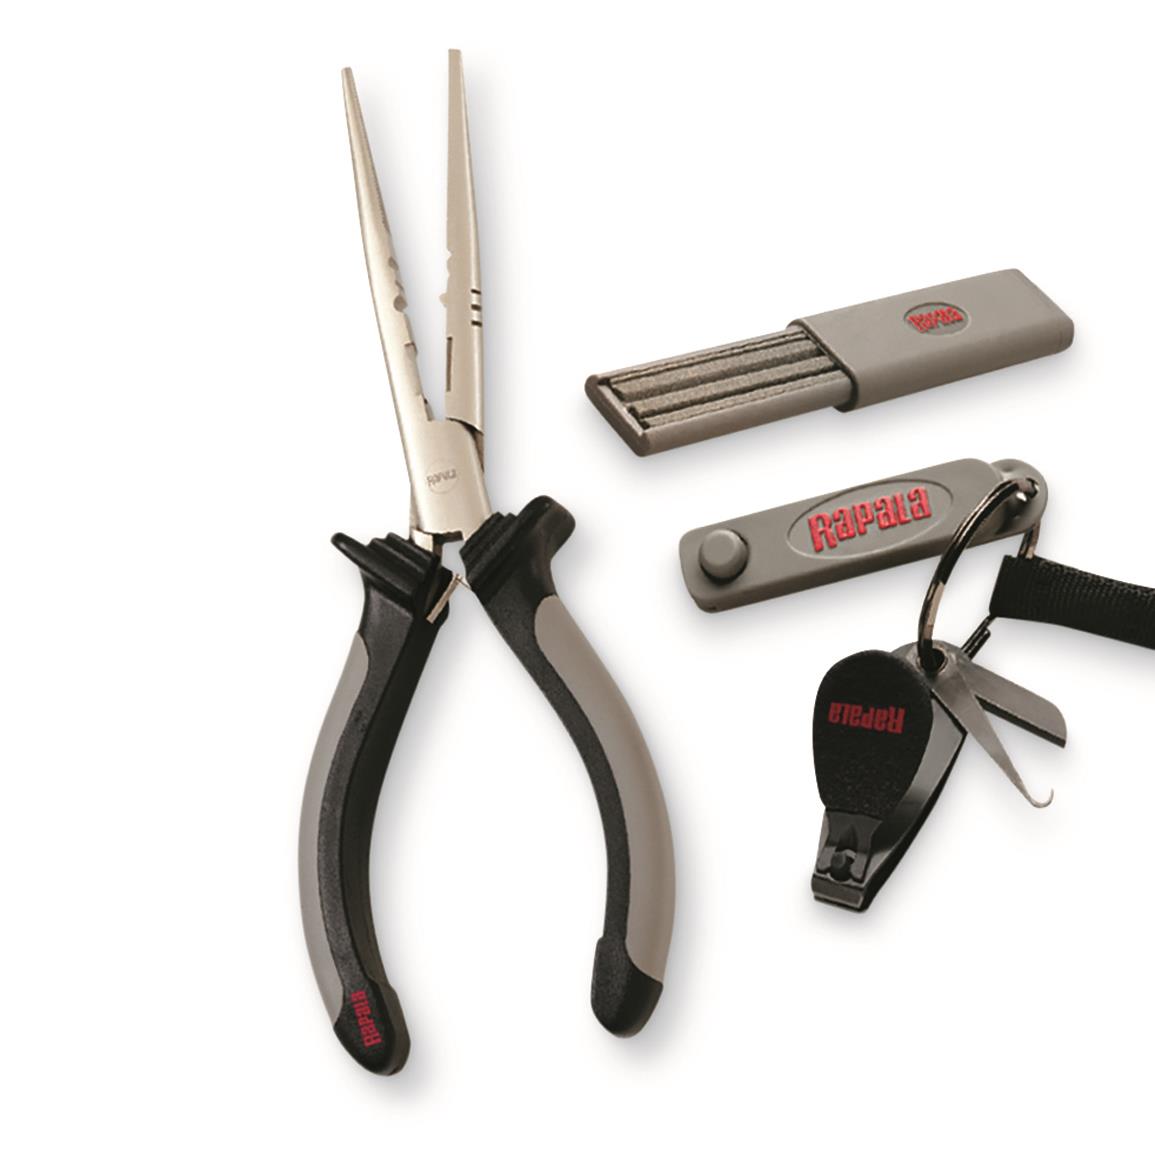 Rapala Tools and Accessories Combo Pack